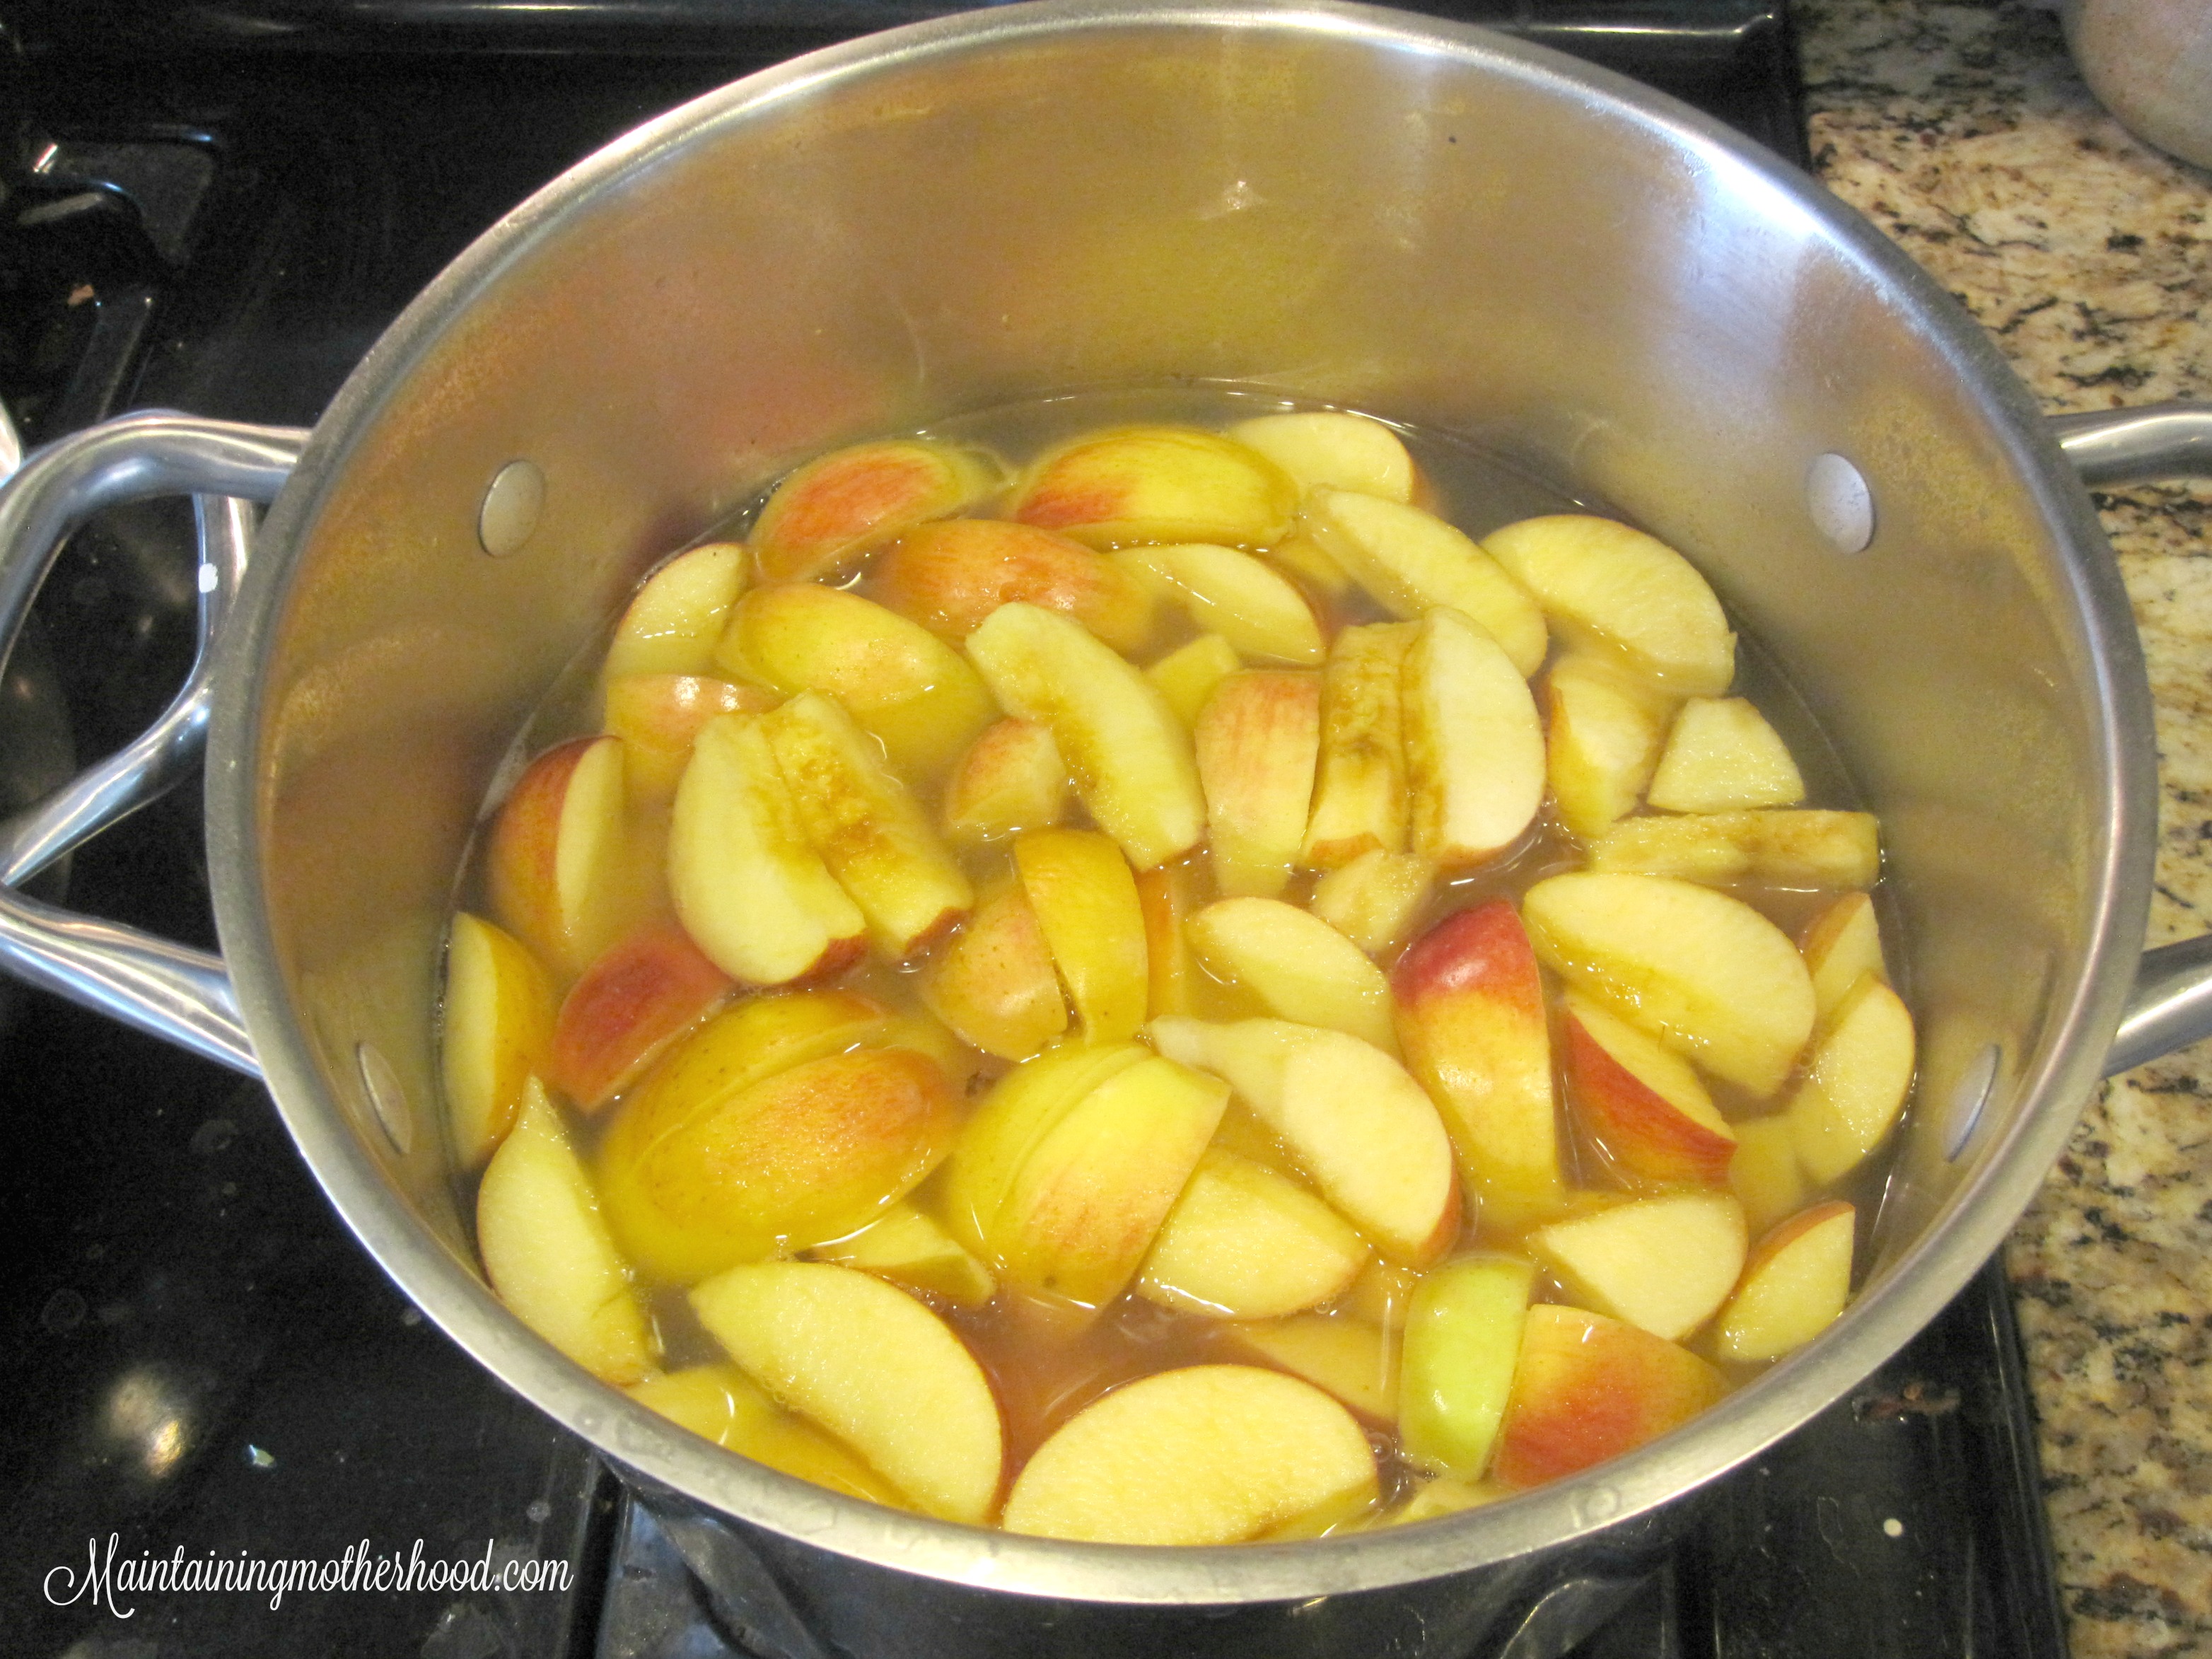 We go a little bit crazy preserving the deliciousness of fresh apples. Here are 10 simple steps to walk you through how to can your applesauce.